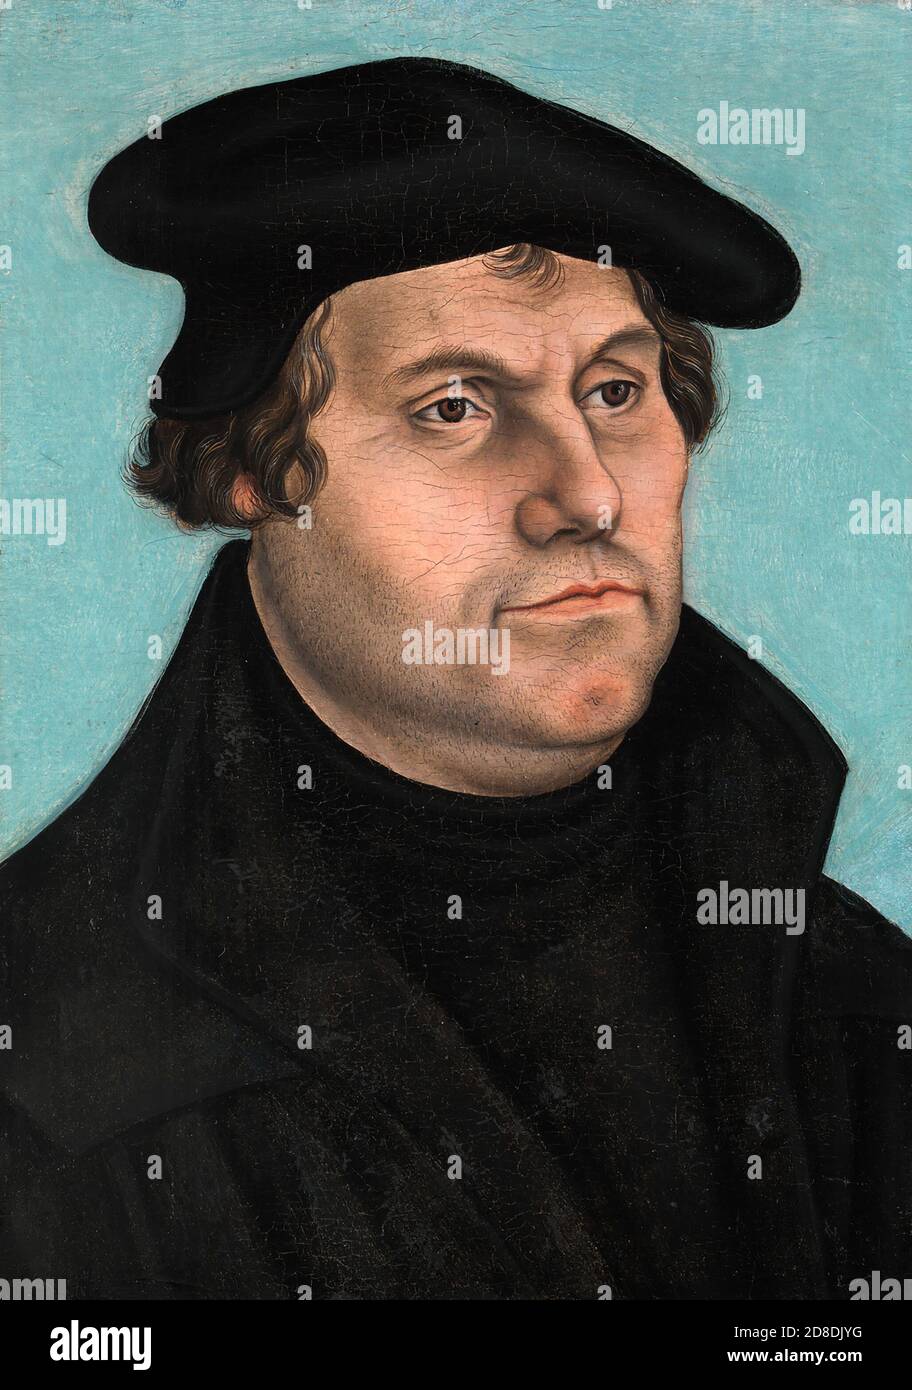 Martin Luther (1483-1546) was a German professor, theologian, and key figure in the Protestant Reformation, as well as a translator of the Bible into the German vernacular. Stock Photo